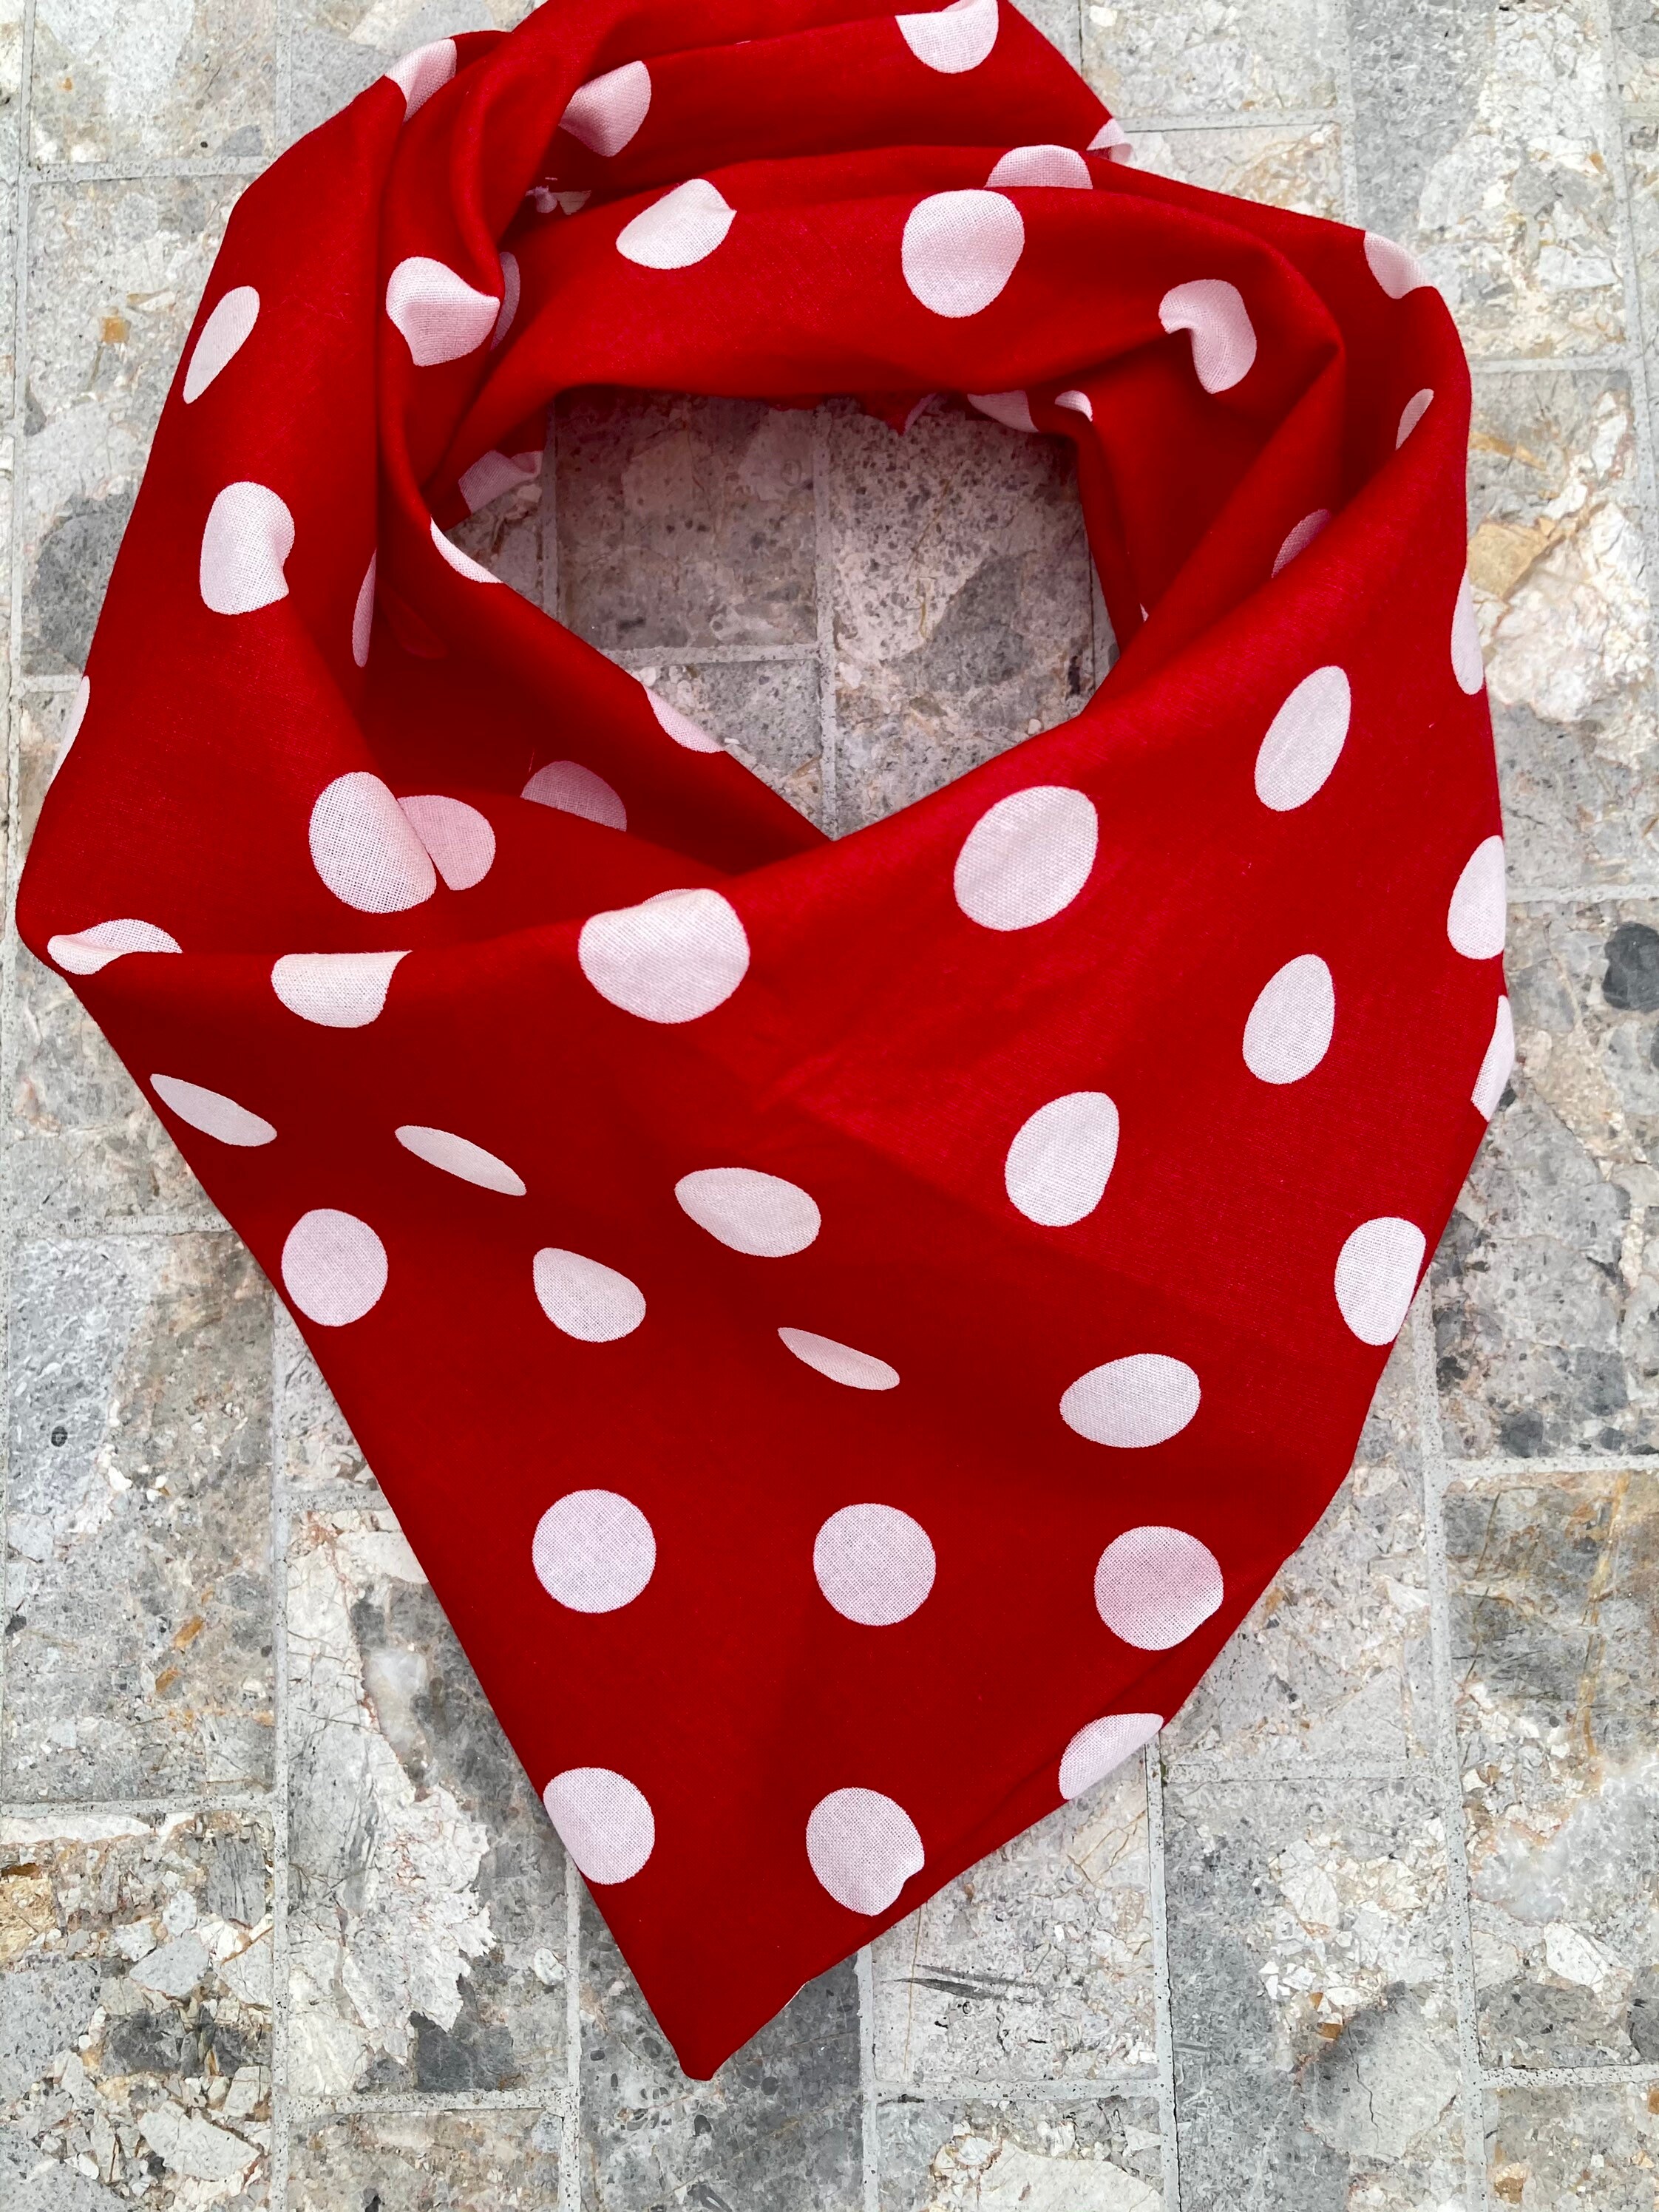 He Spoke Style Burgundy Silk Scarf with White Dots